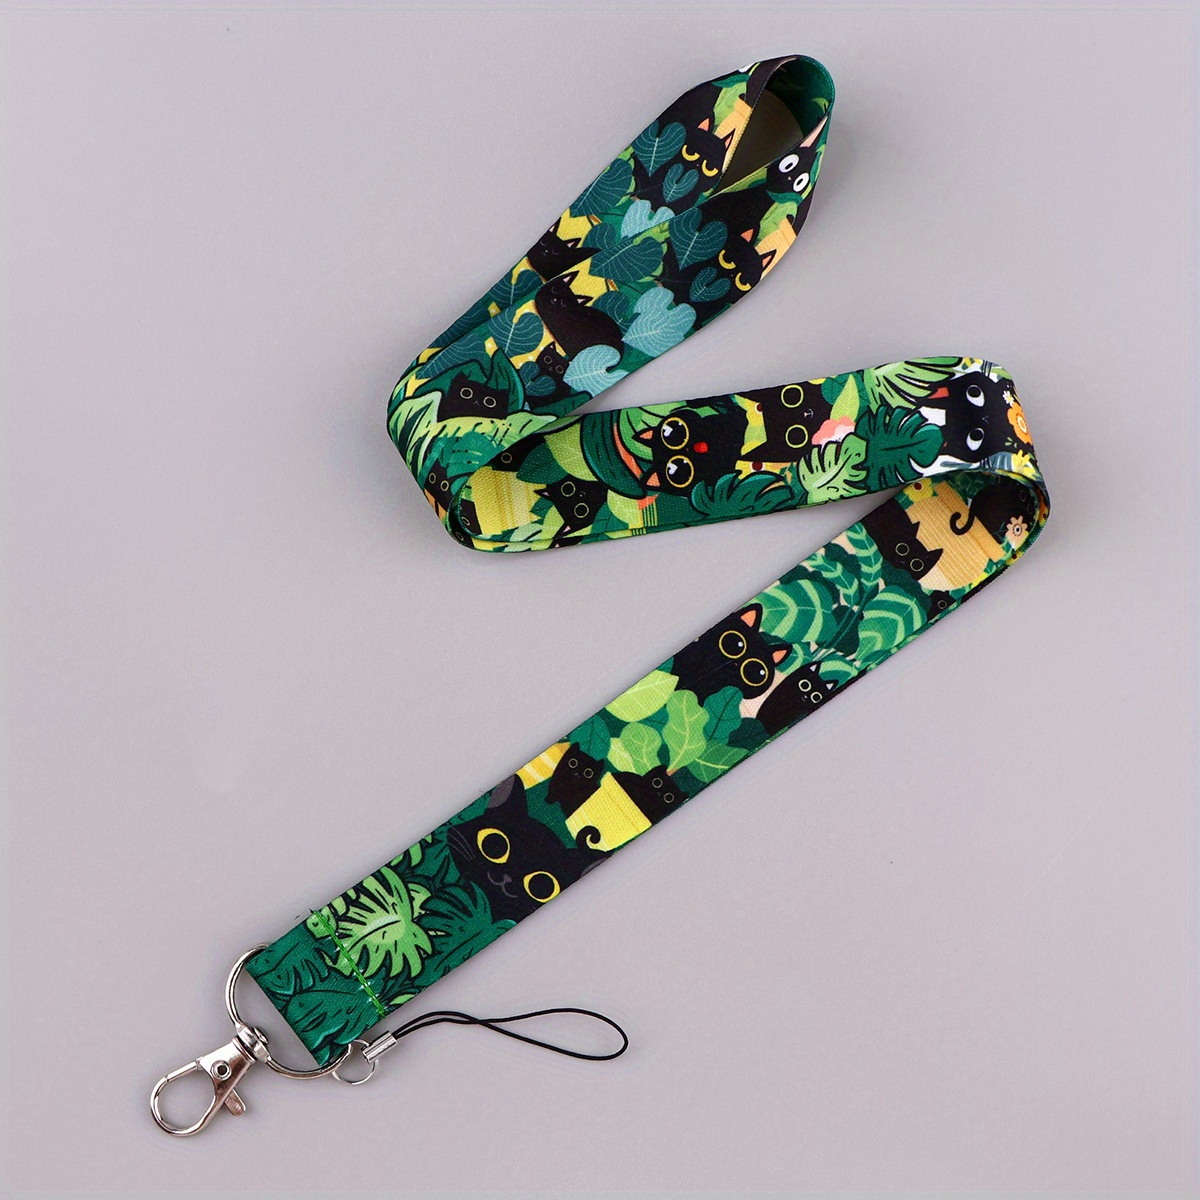  Black Cat Flower Lanyards for Id Badges, Id Badge